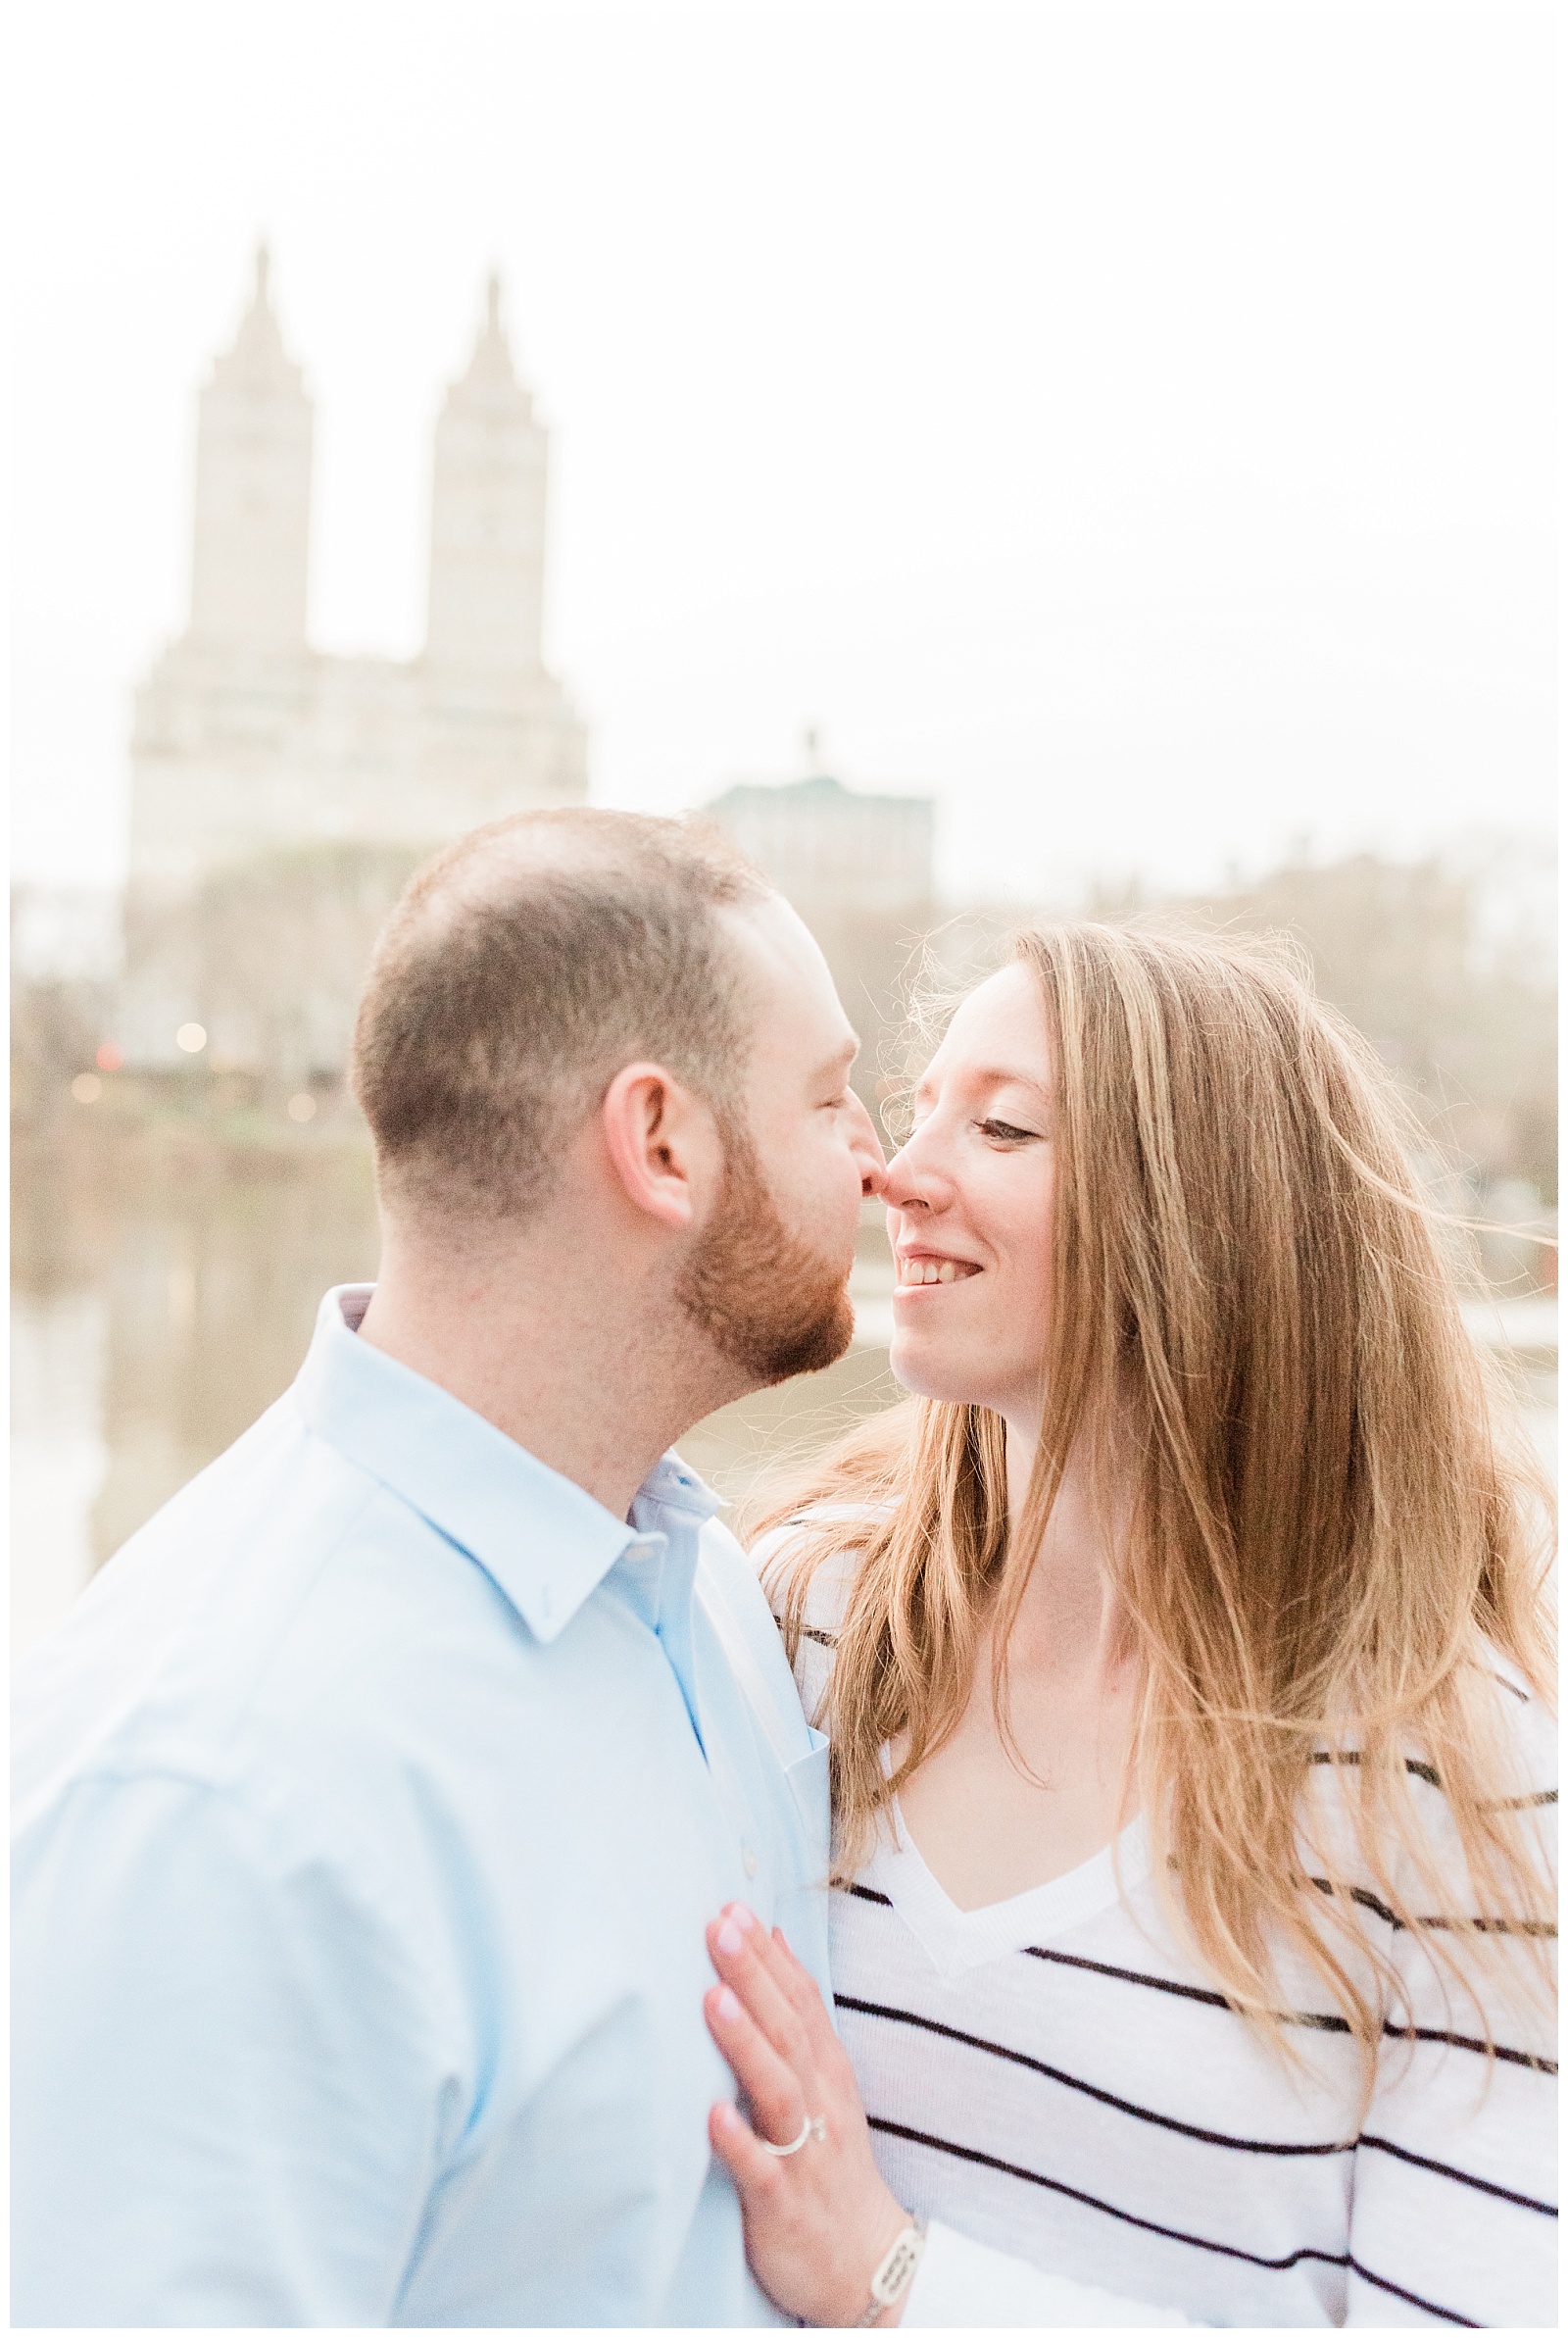 Central Park, NYC engagement session, springtime, wedding photographer, New York, in love, light and airy